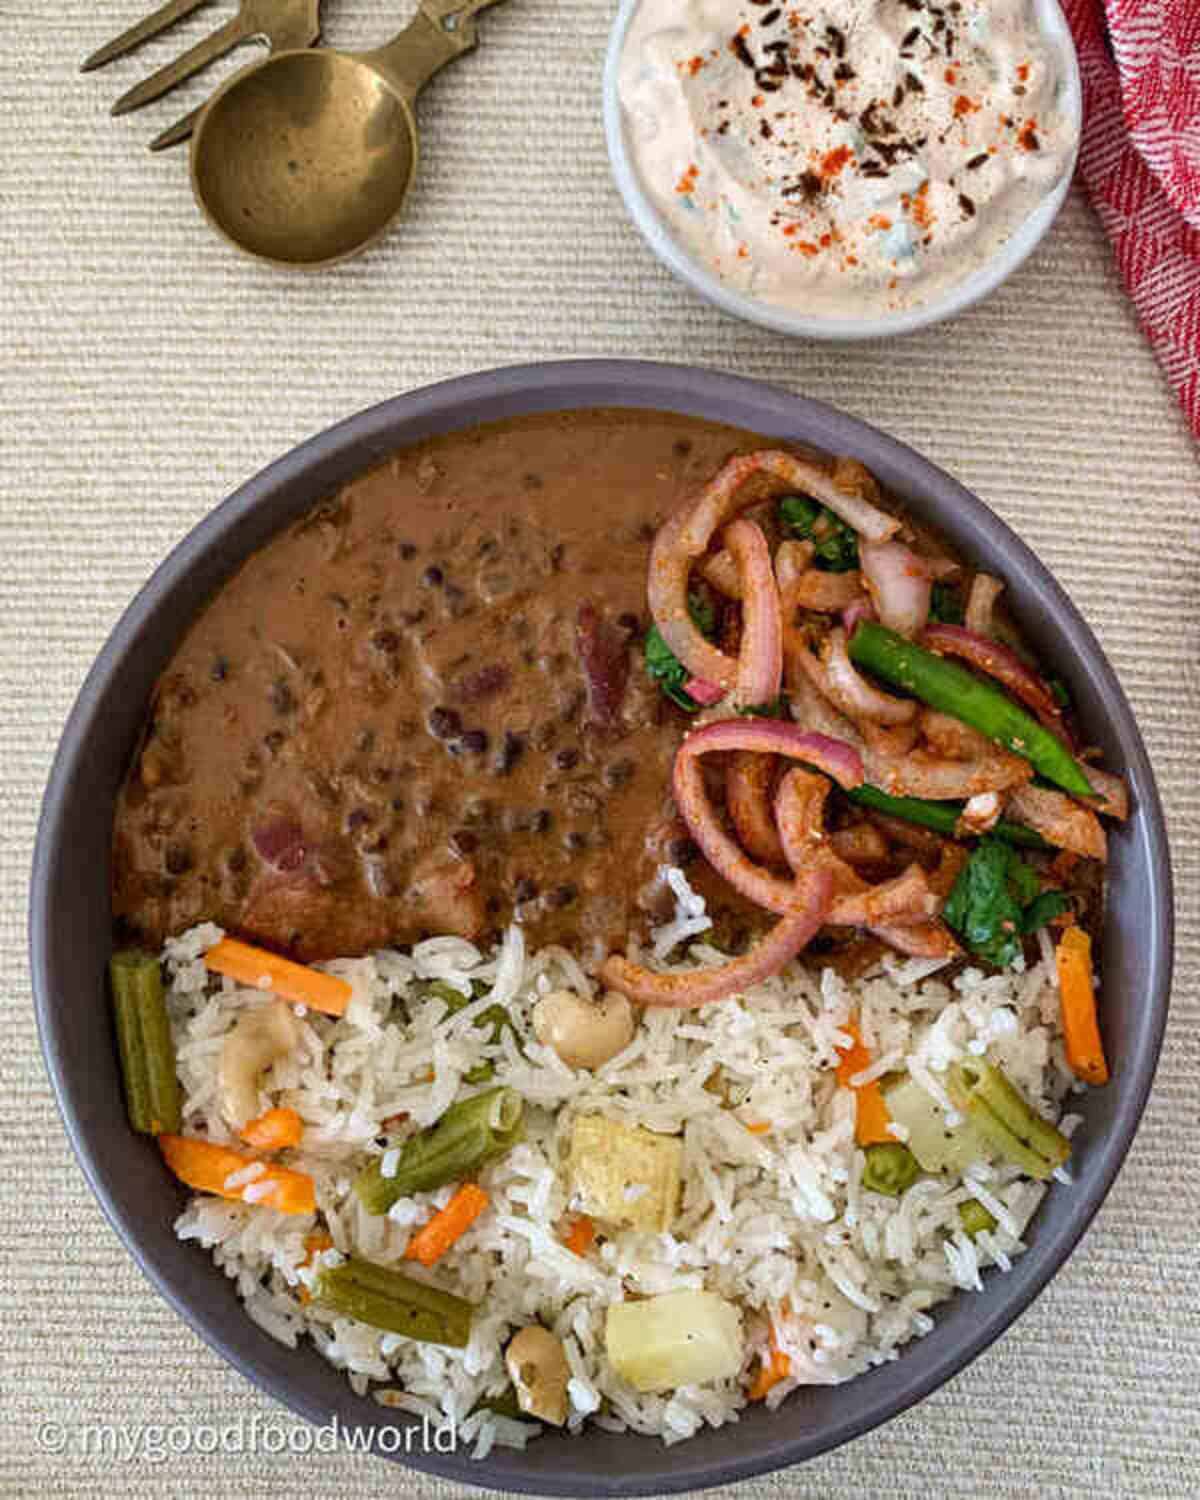 Vegetable pulao, dal makhani, lacha pyaz served in a round grey bowl with cucumber raita on the side.